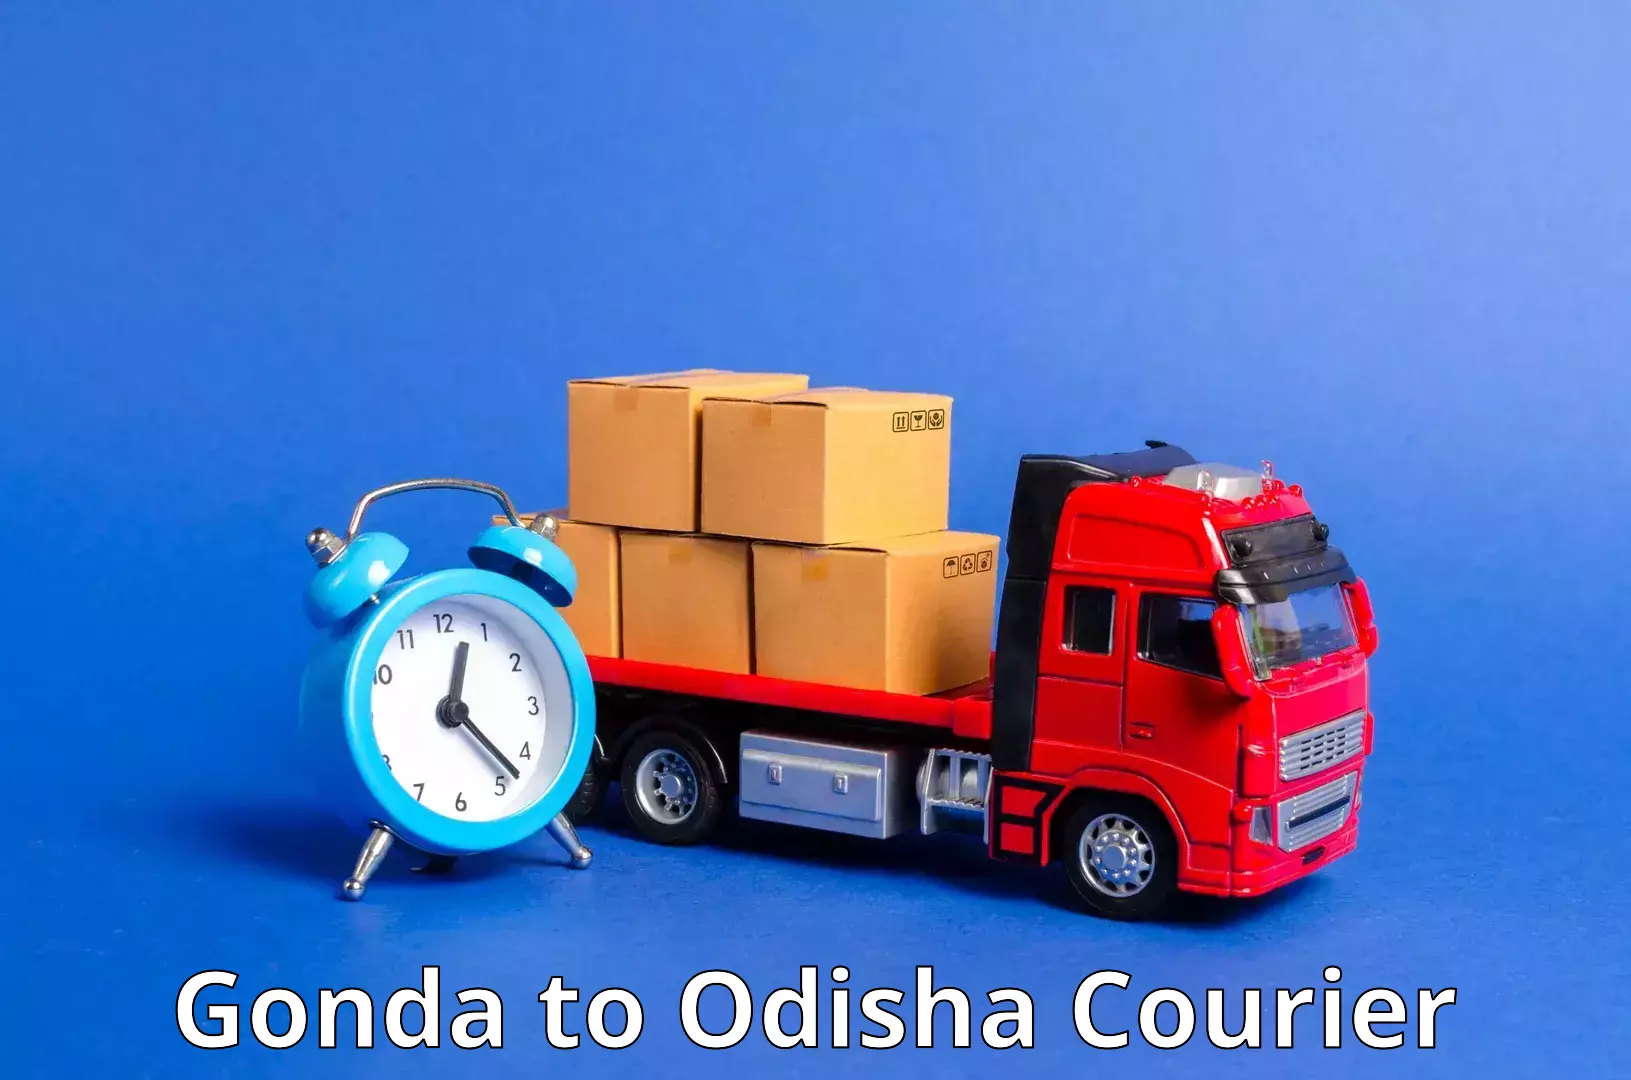 24/7 shipping services in Gonda to Chandipur